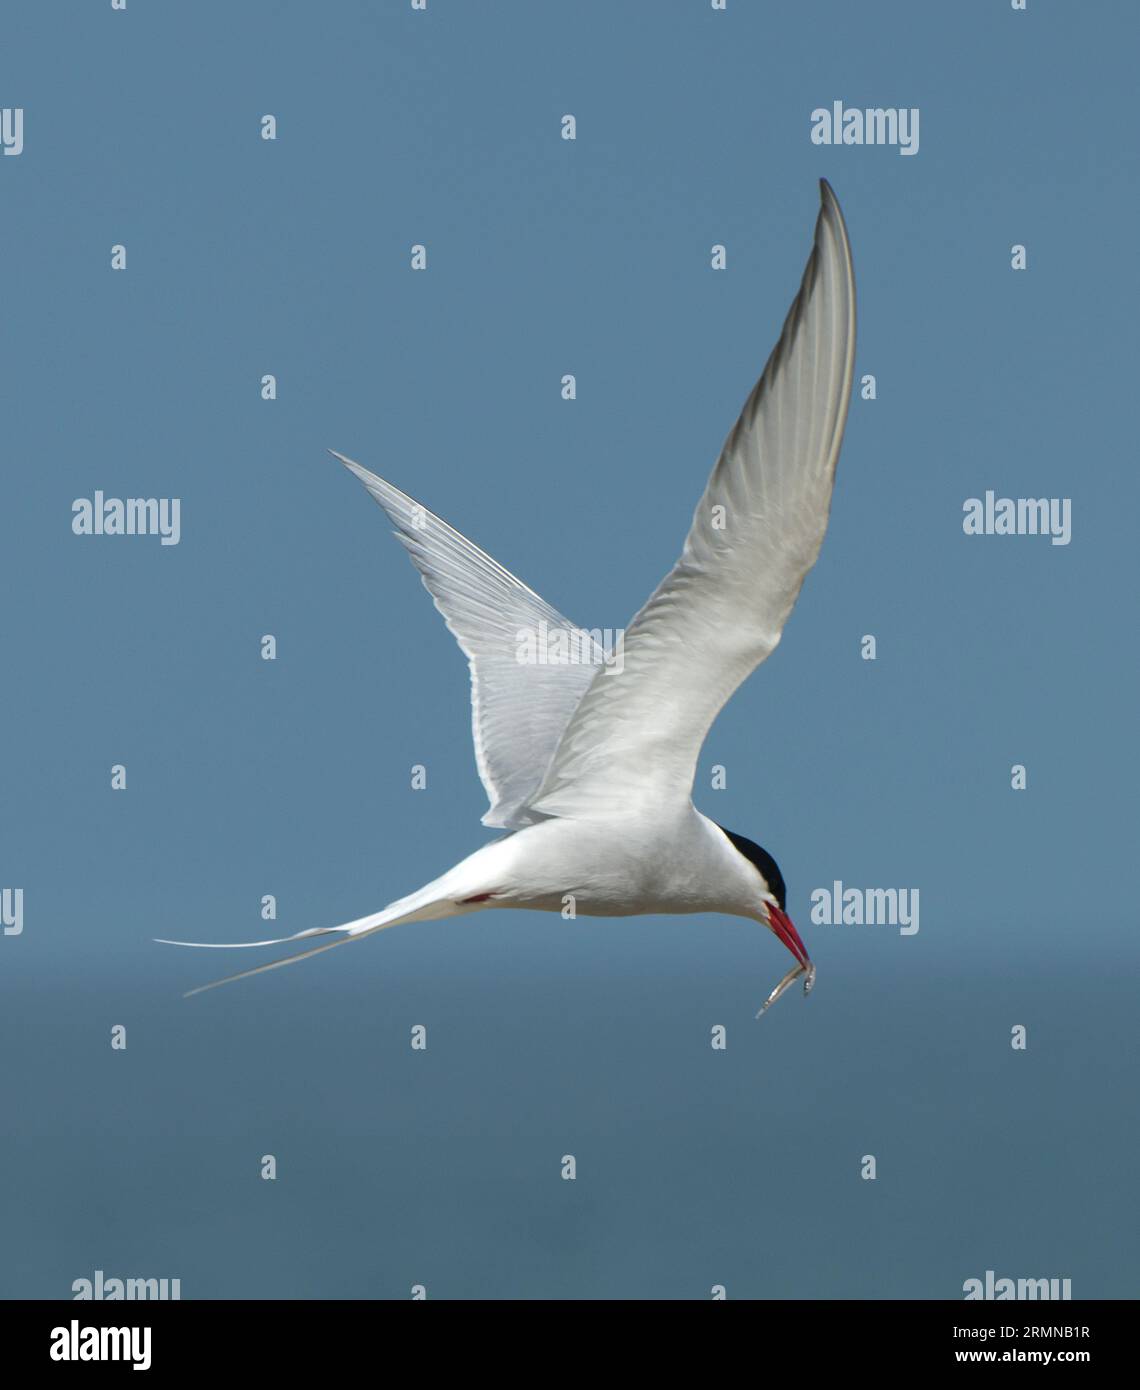 Square colour image of Arctic Tern with wings raised in flight, tail outstretched and fish in bill against muted background of sea and sky Stock Photo